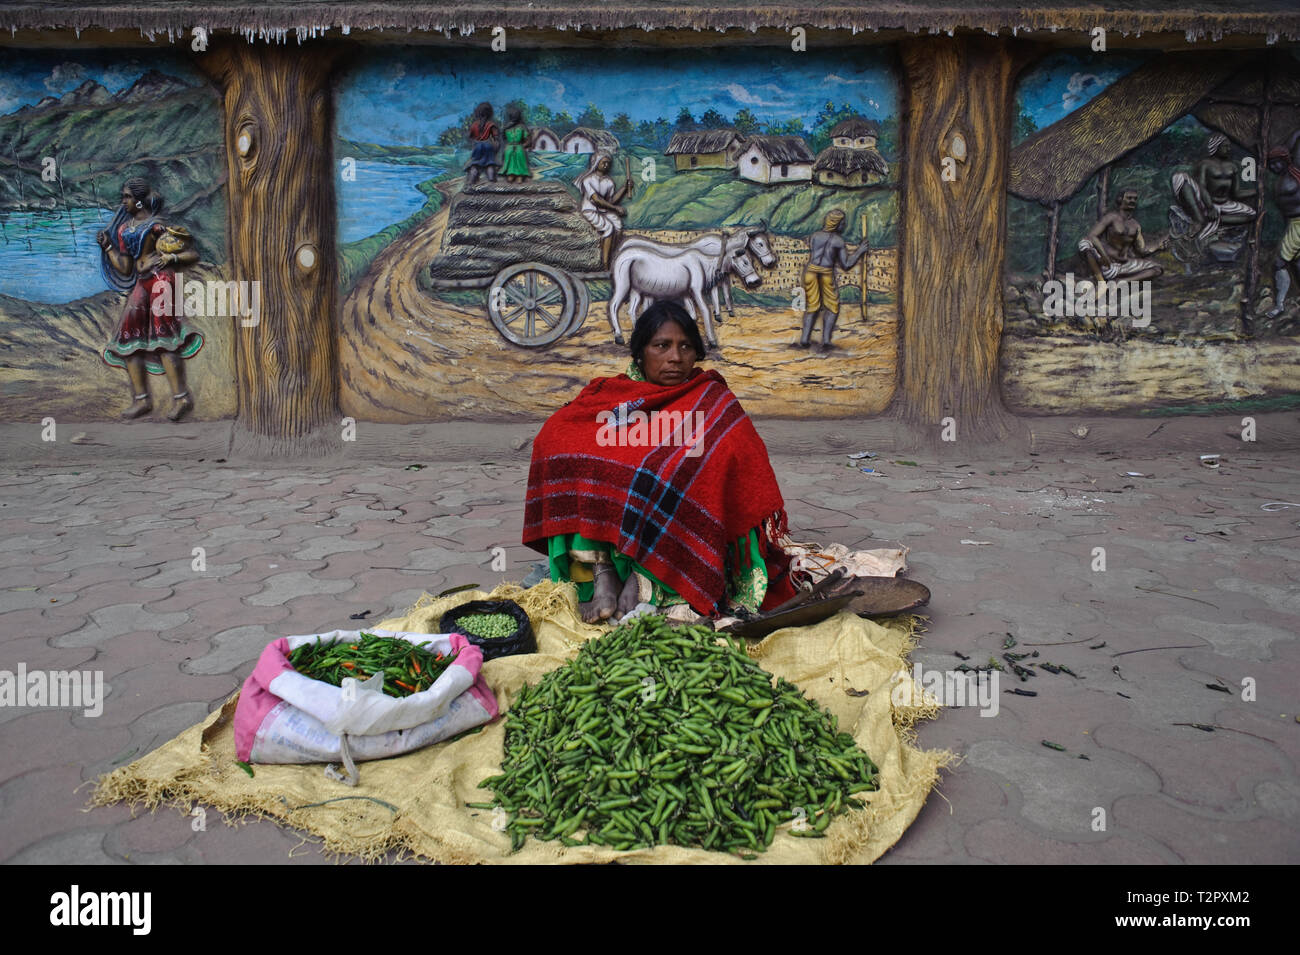 Woman selling vegetables + mural decoration inspired by tribal life ( India) Stock Photo